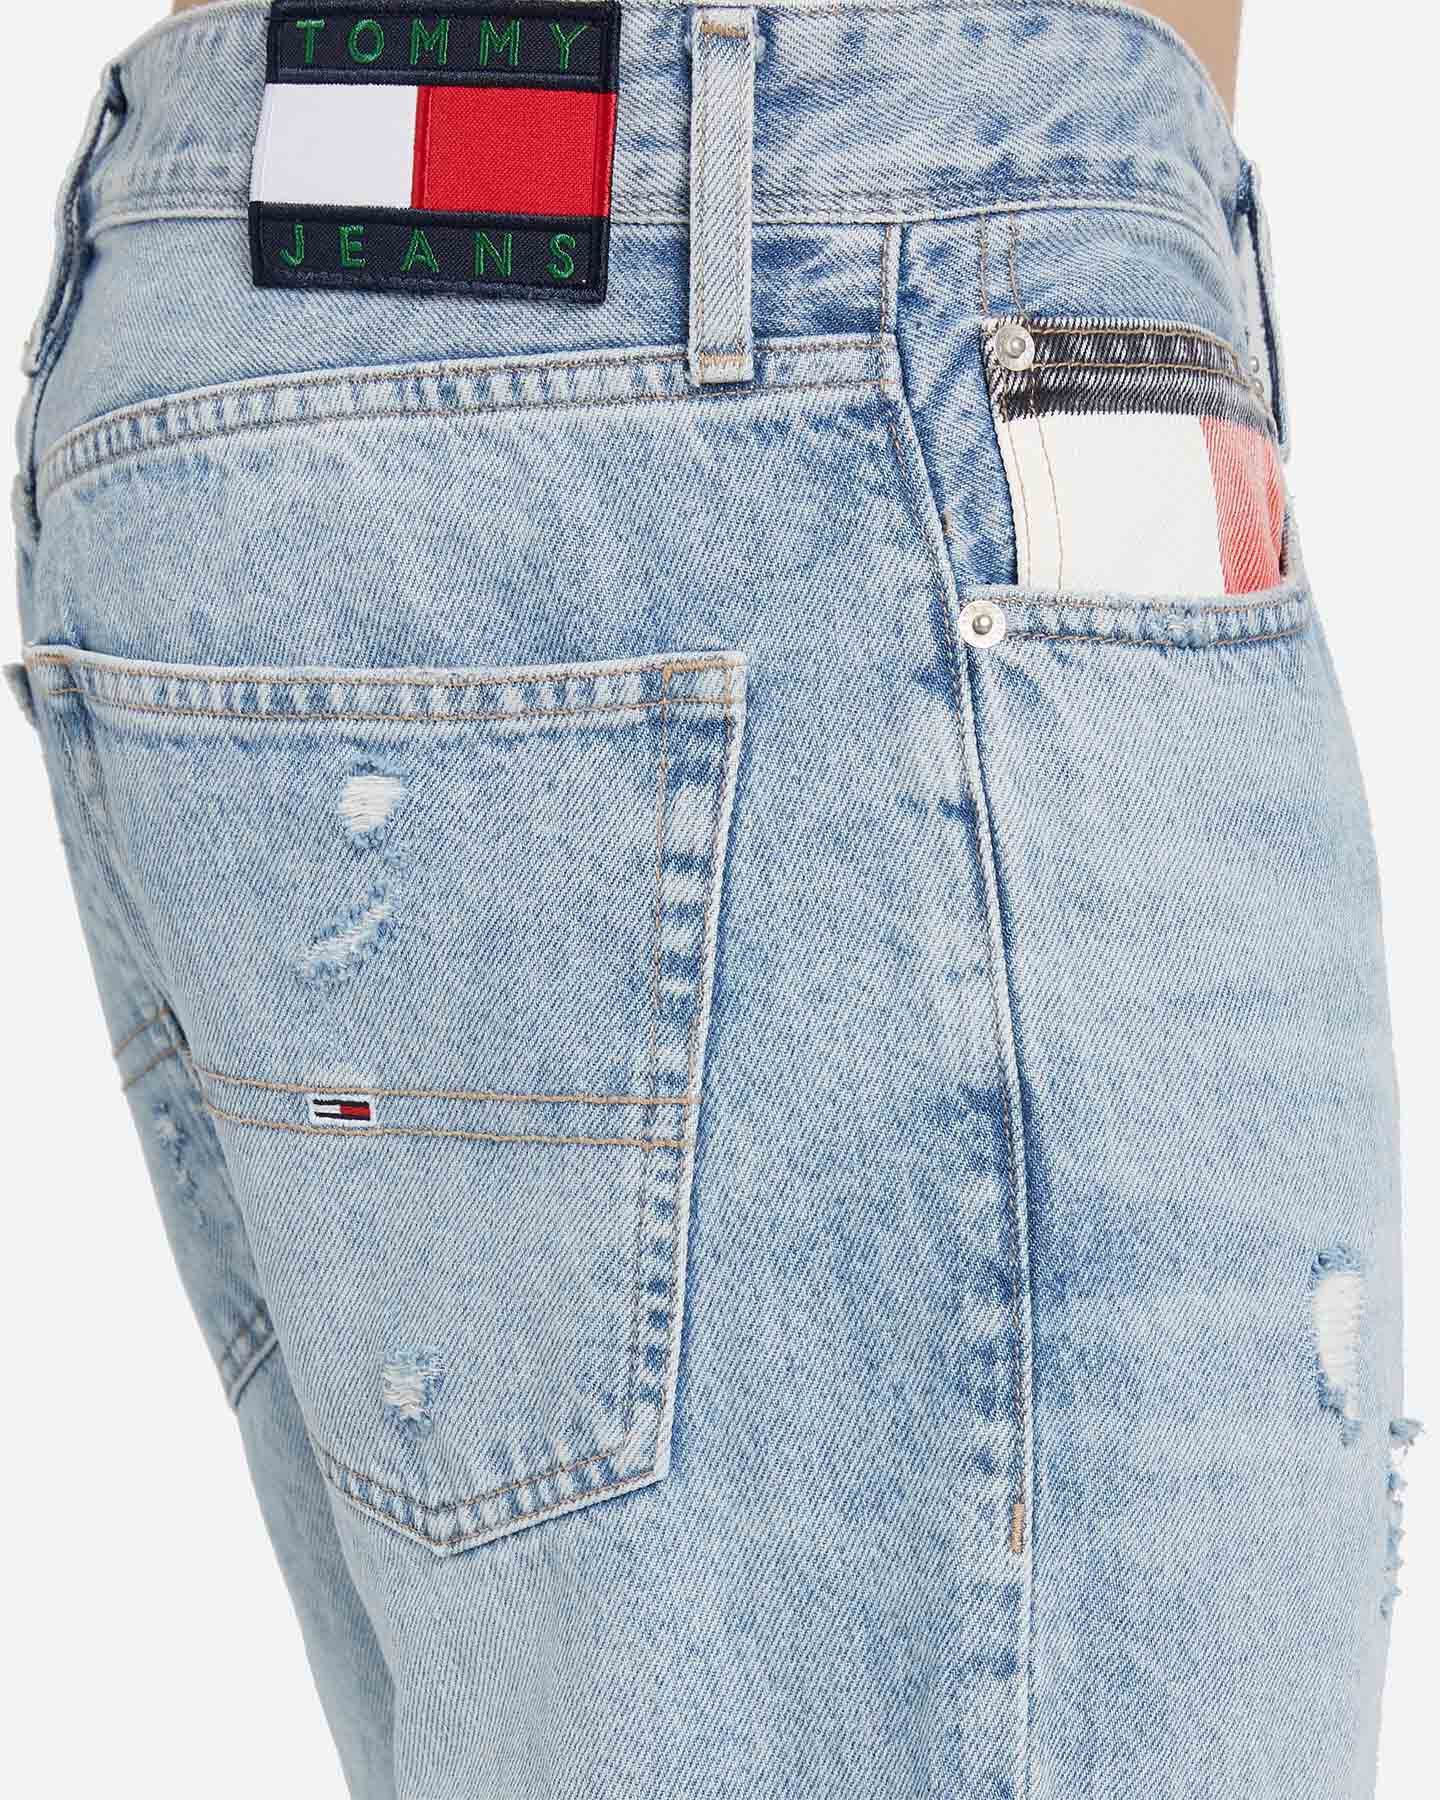  Jeans TOMMY HILFIGER STRAIGHT POKET LOGO M S4088741|1AB|29 scatto 3